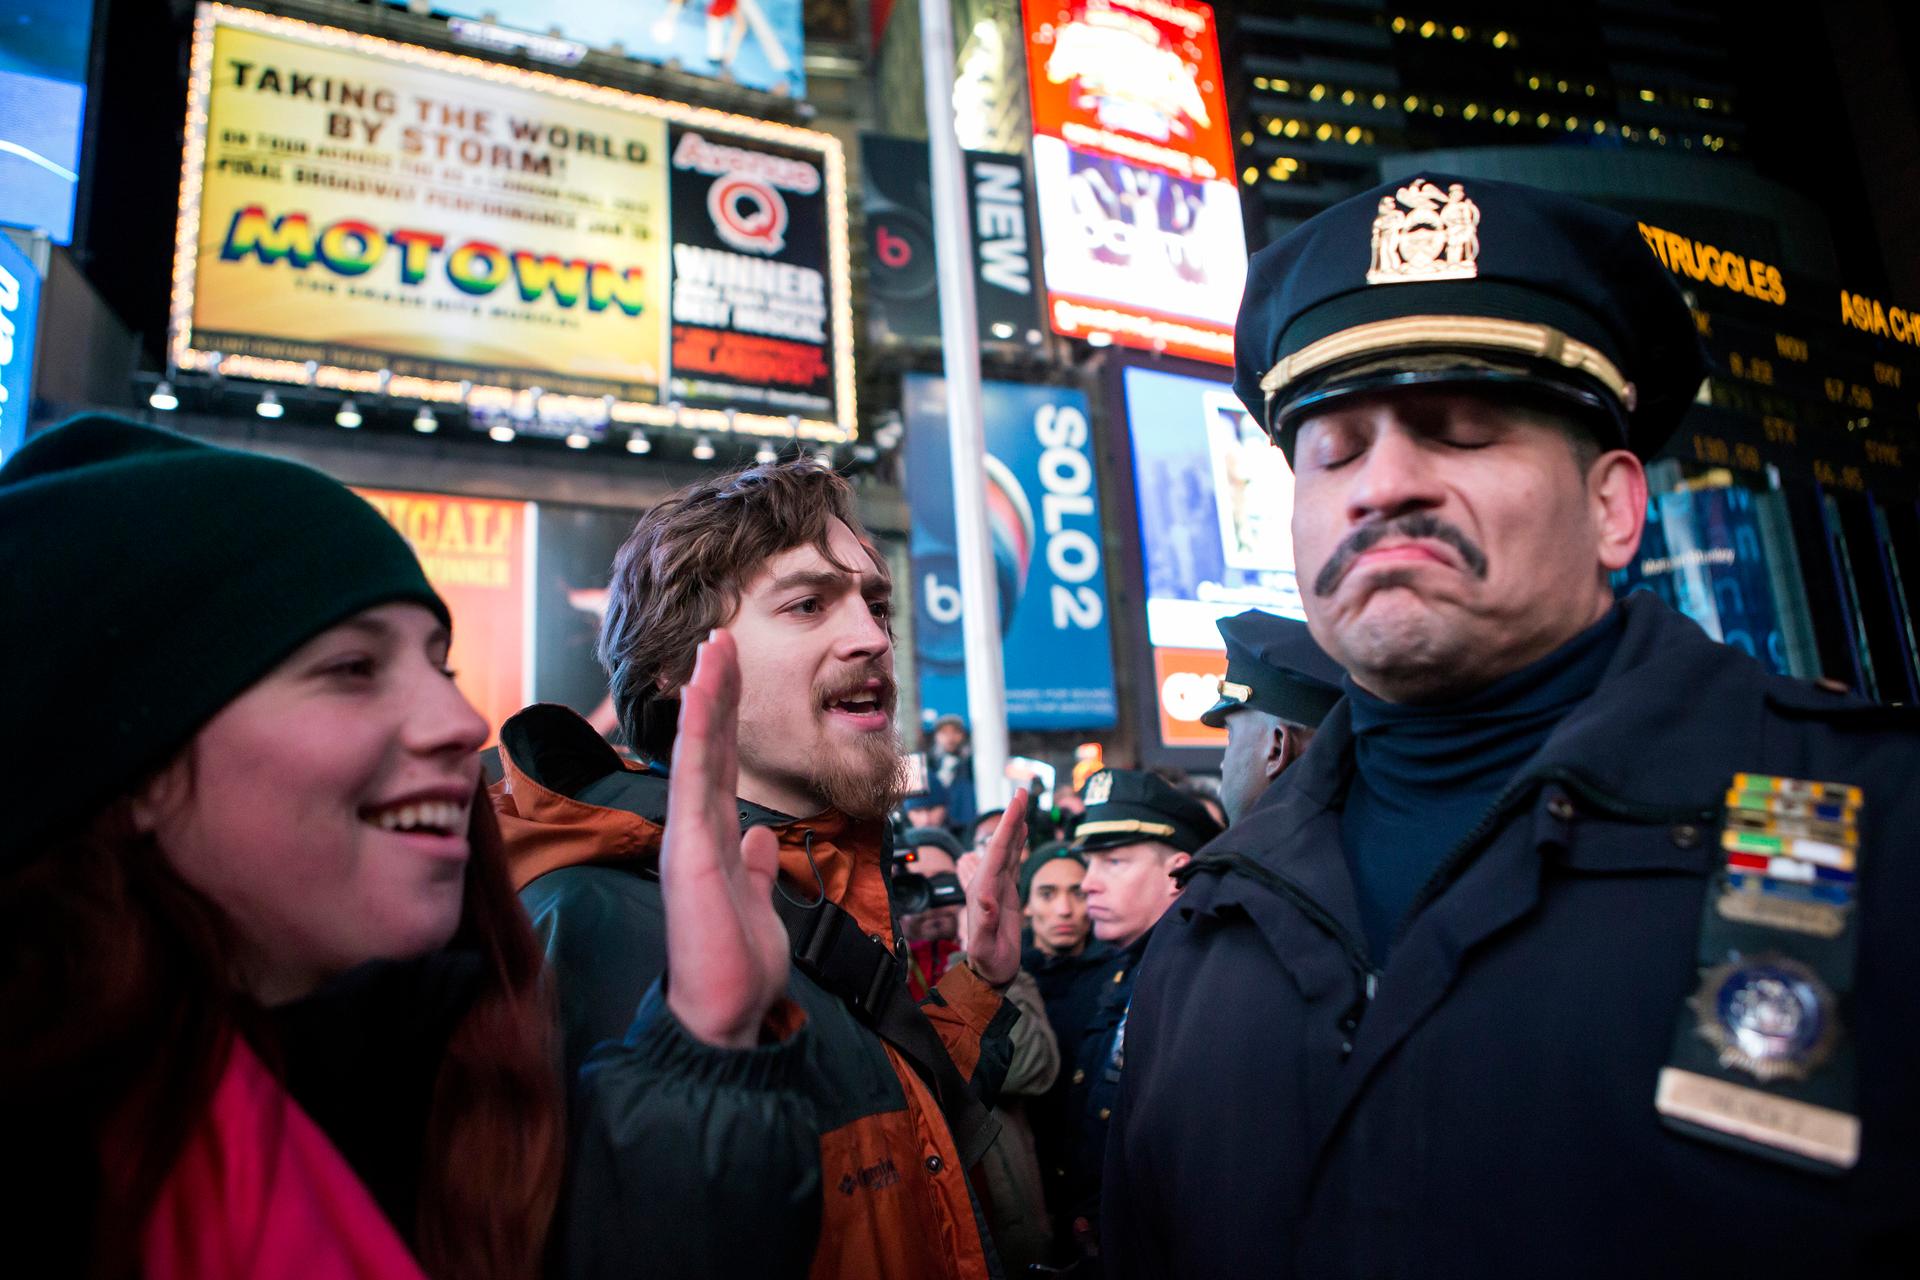 A New York City police officer reacts next to people protesting against the death of Eric Garner during an arrest in July.